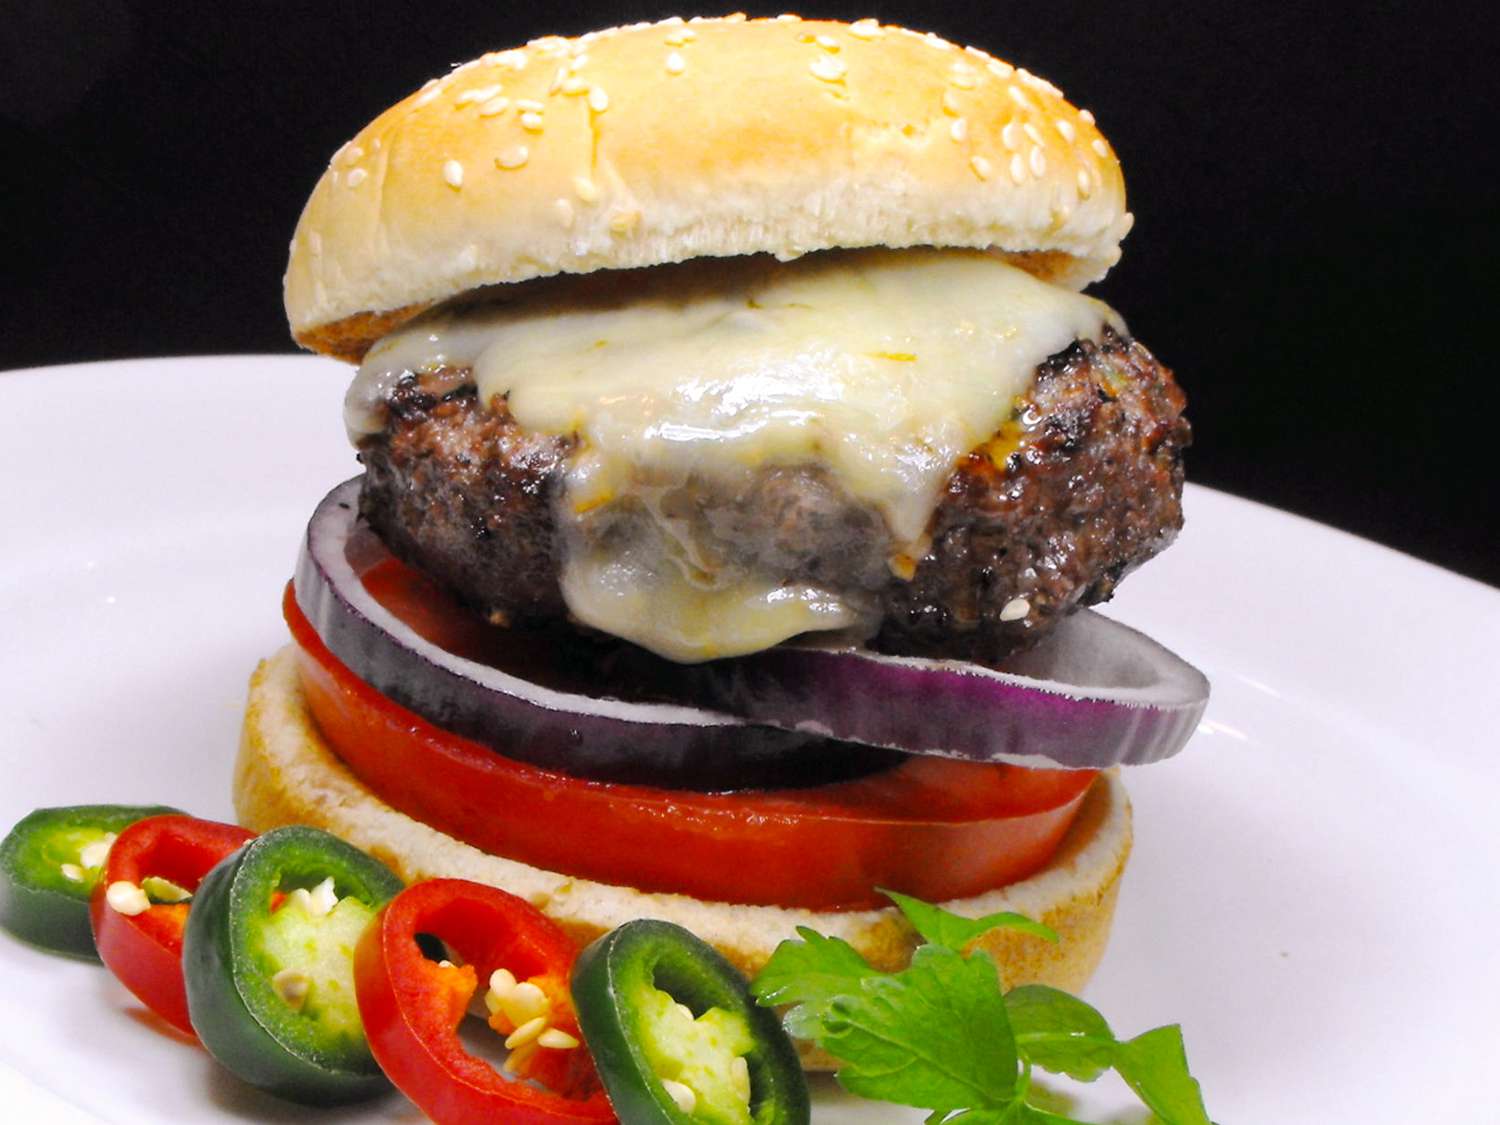 close up view of Jalapeno-Garlic-Onion Cheeseburger with peppers on a white plate